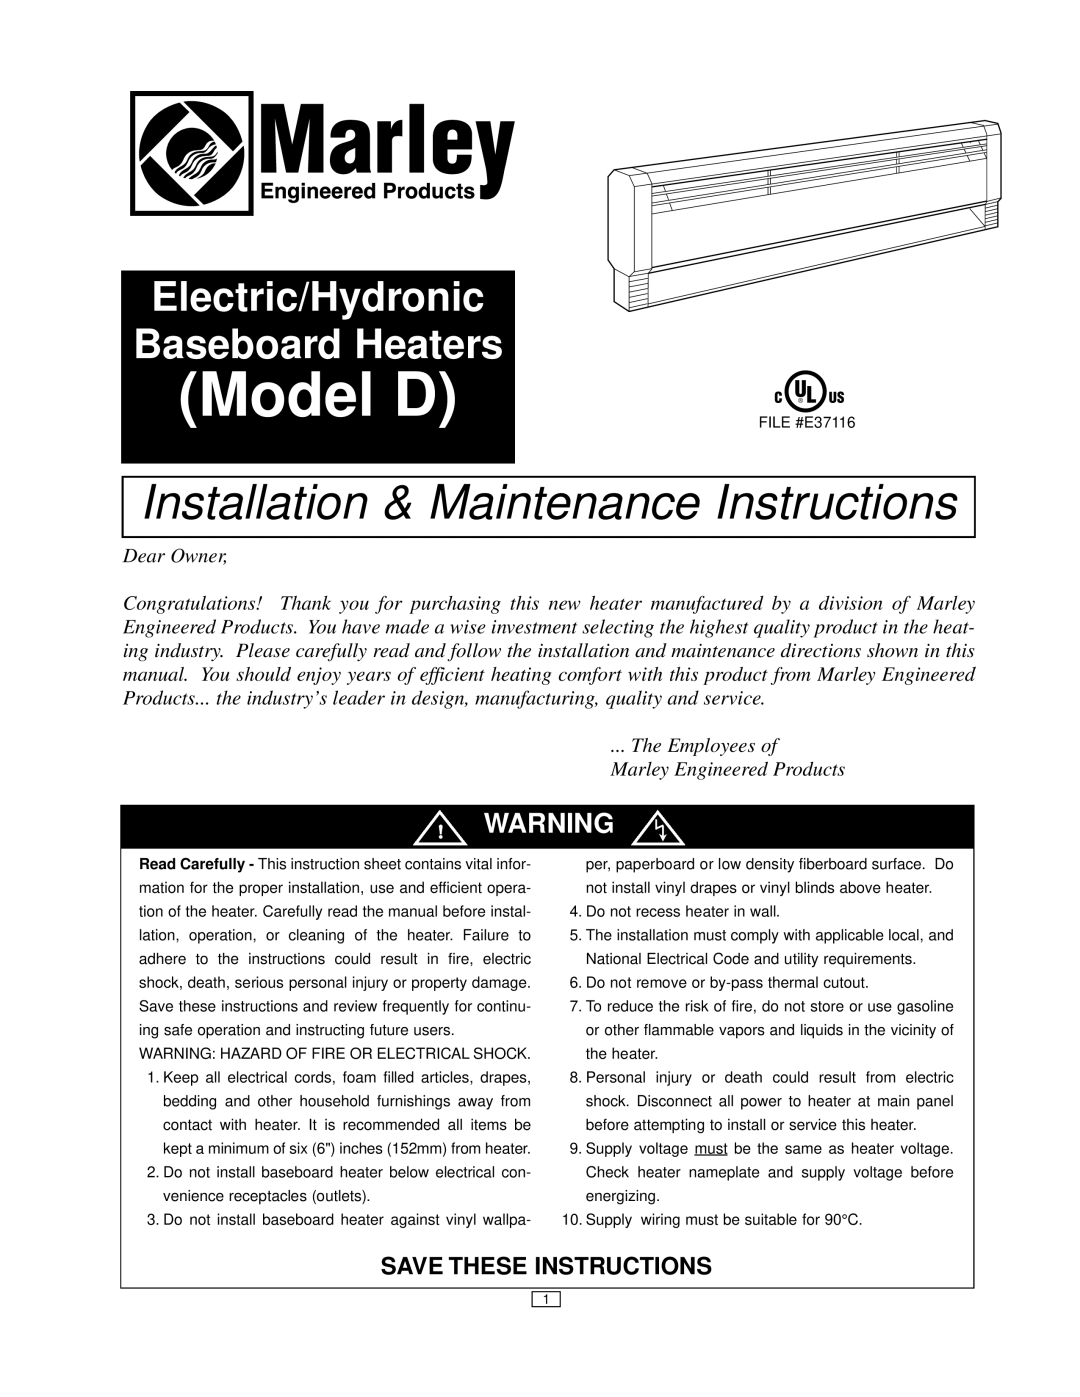 Marley Engineered Products instruction sheet Model D, Installation & Maintenance Instructions, Save These Instructions 